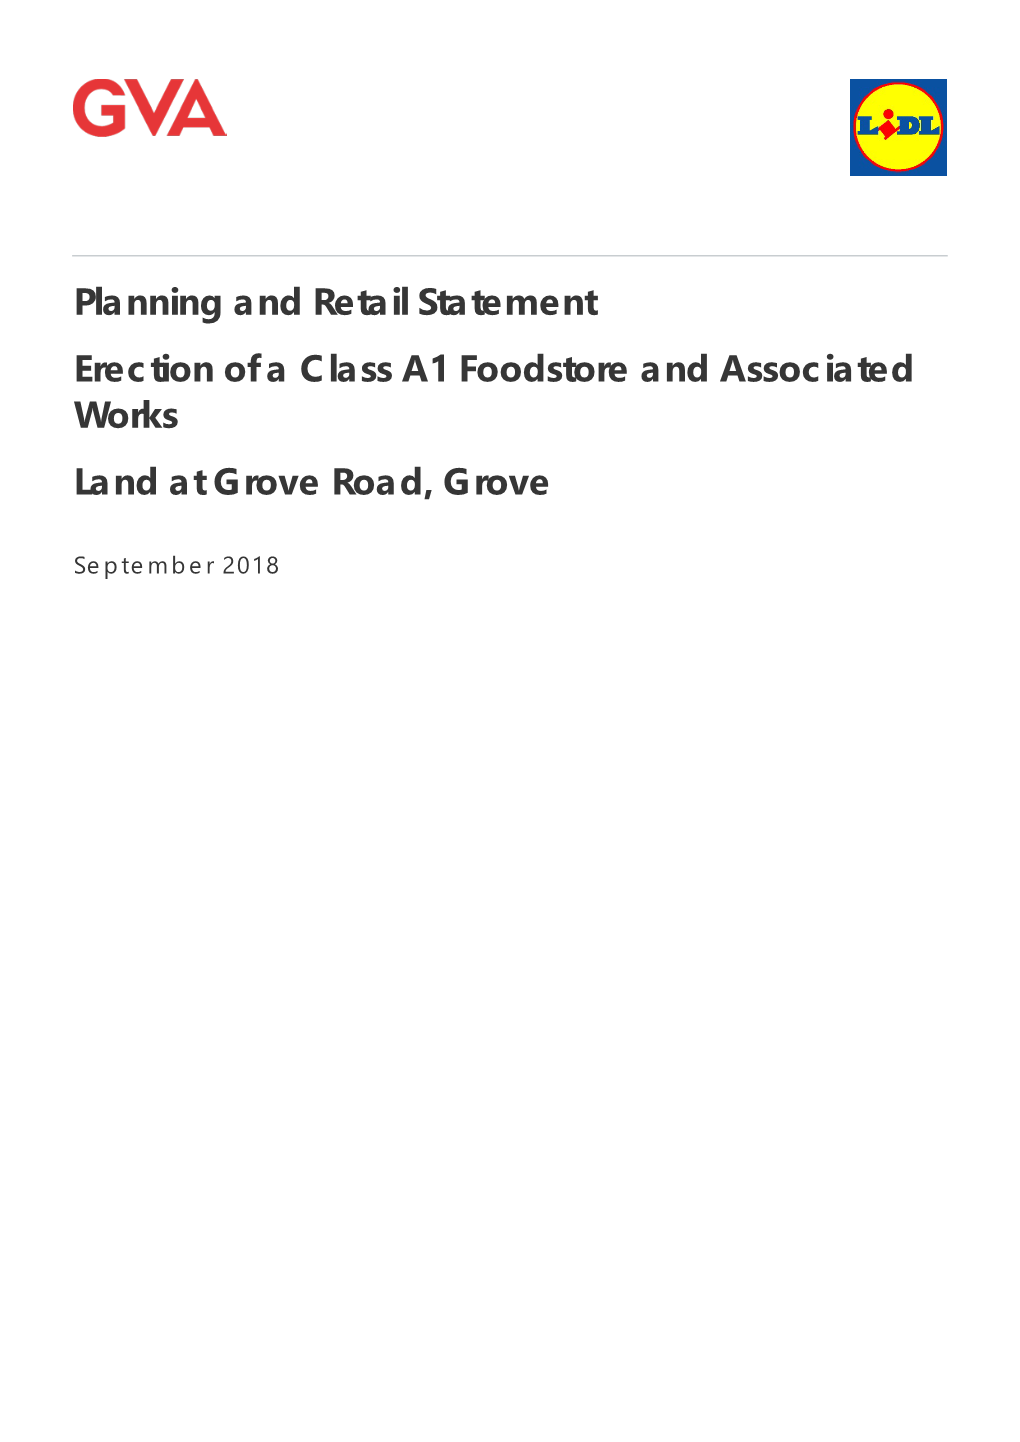 Planning and Retail Statement Erection of a Class A1 Foodstore and Associated Works Land at Grove Road, Grove